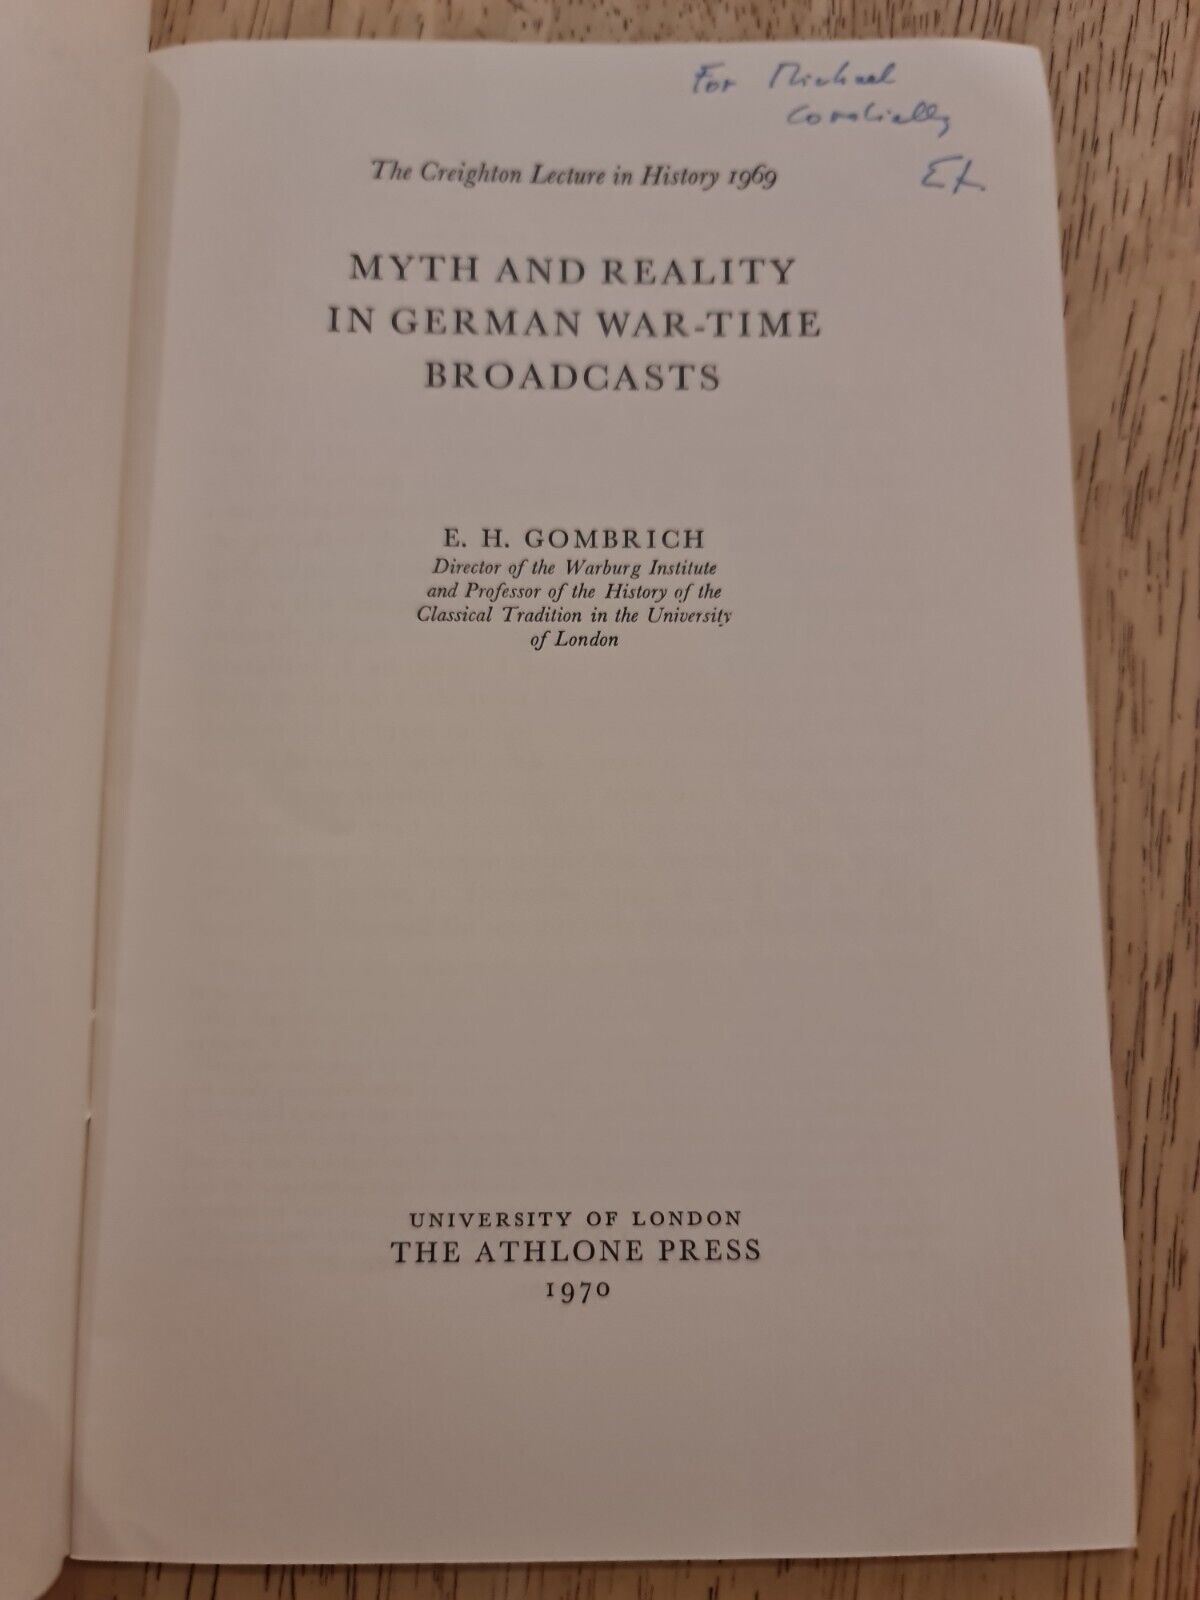 Myth and Reality in German War-Time Broadcasts by E H Gombrich